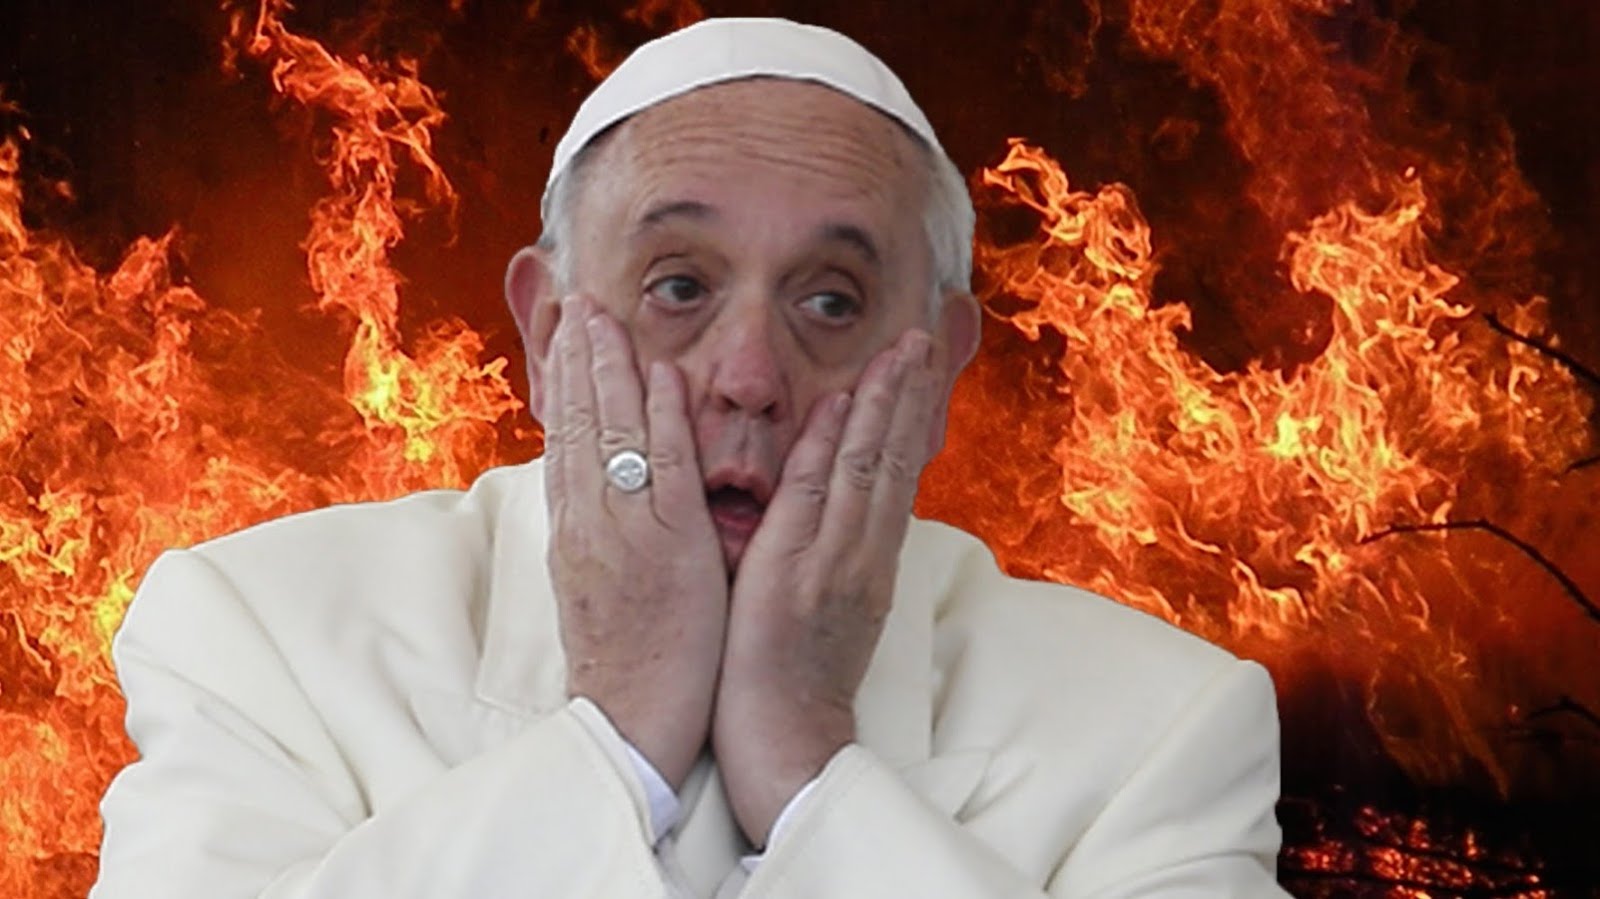 POPE FRANCIS - THE FALSE PROPHET - FINALLY ENDS UP IN HELL